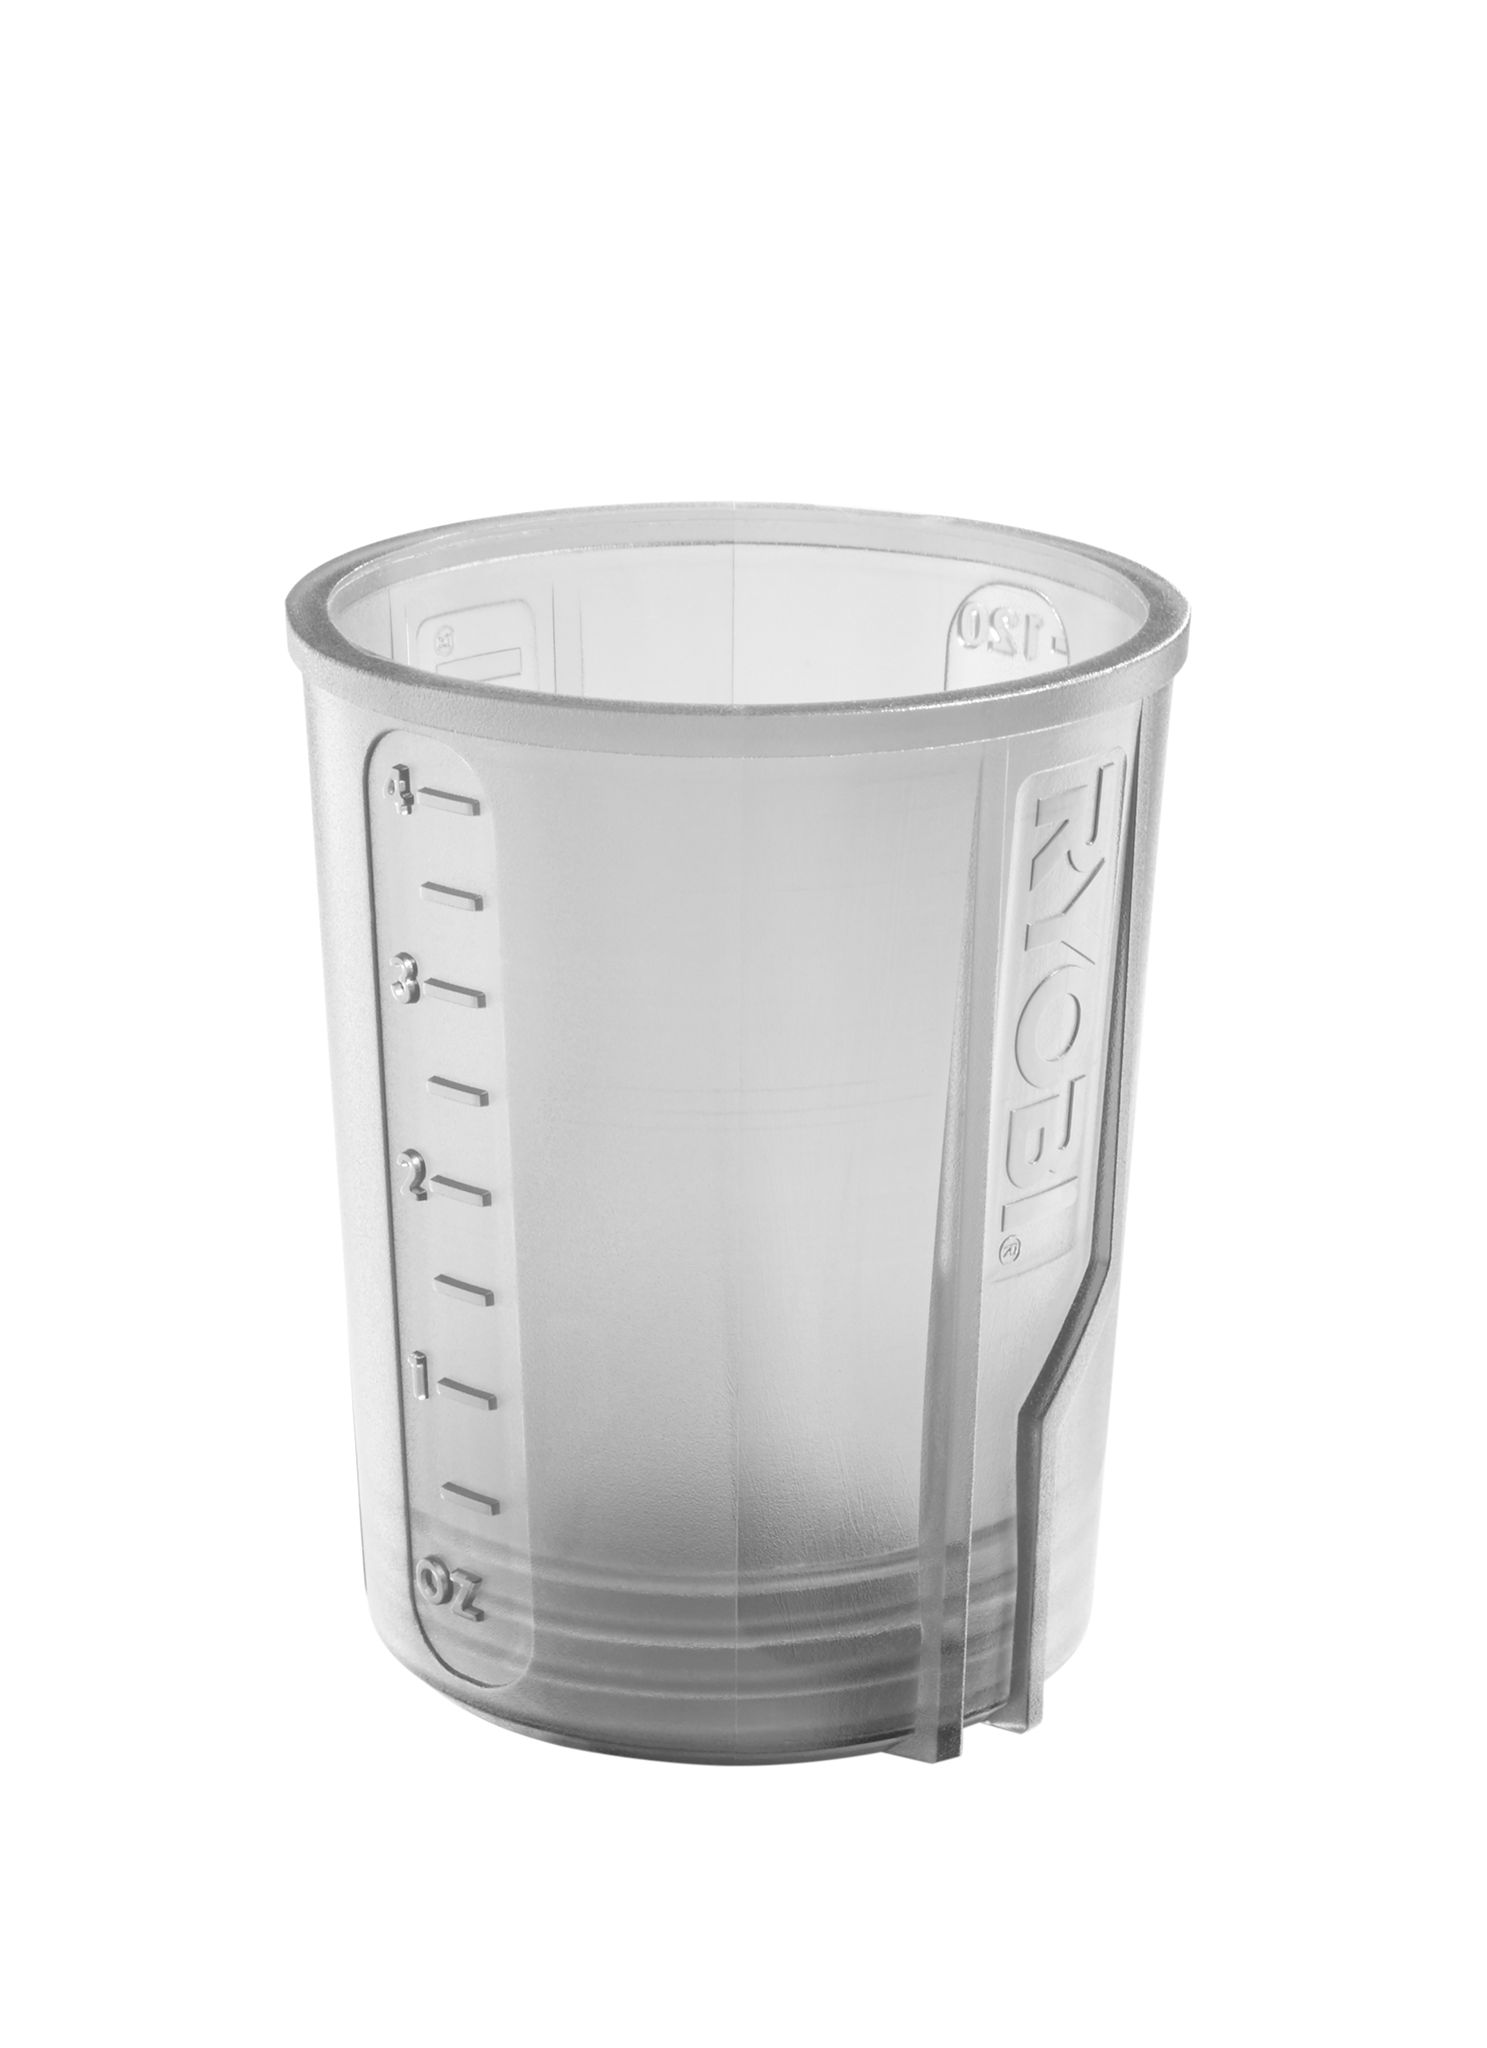 Included on-board measuring cup